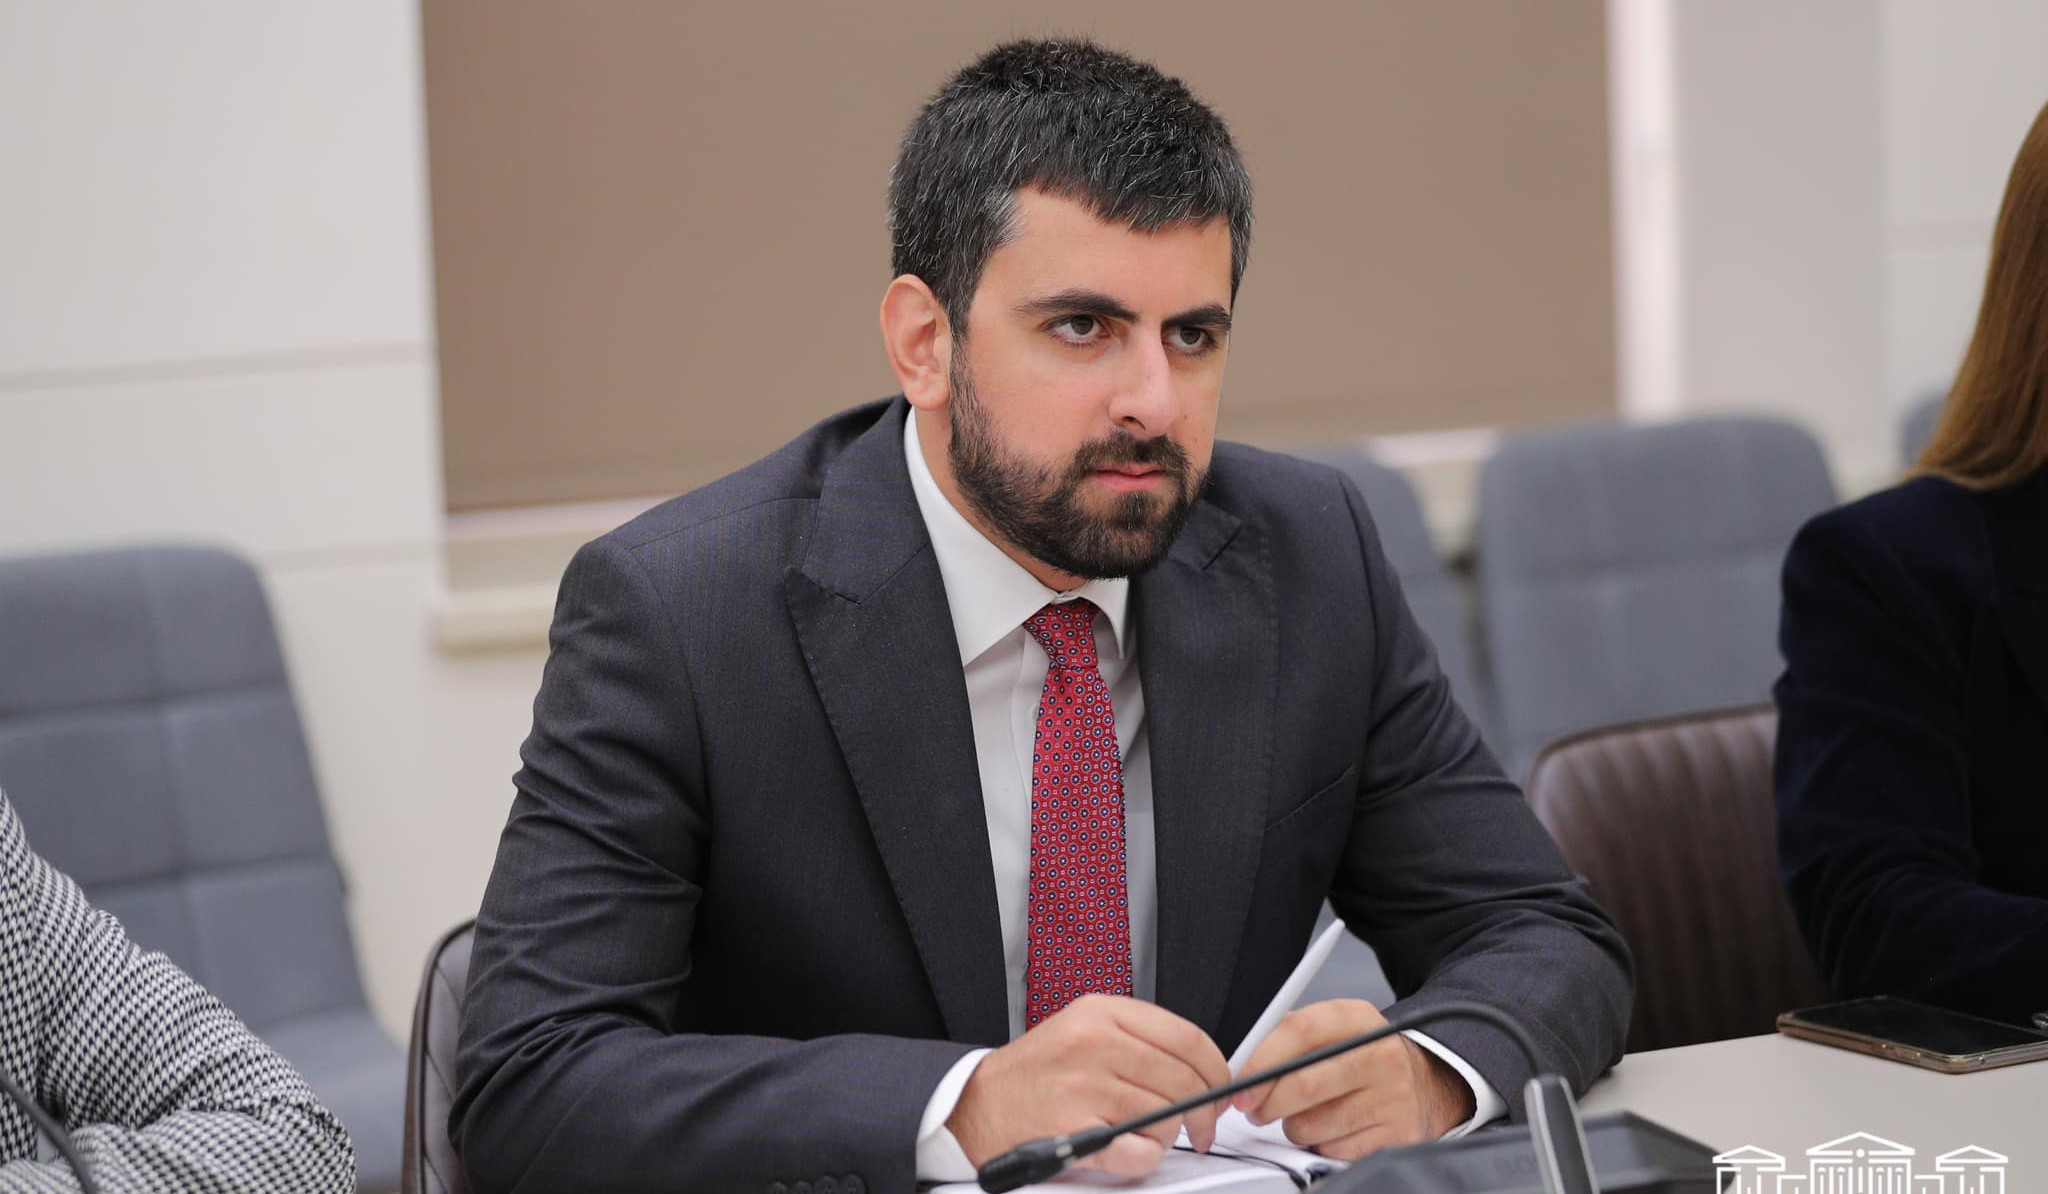 Sargis Khandanyan clarified why Russia, Azerbaijan and Turkey do not participate in OSCE PA session